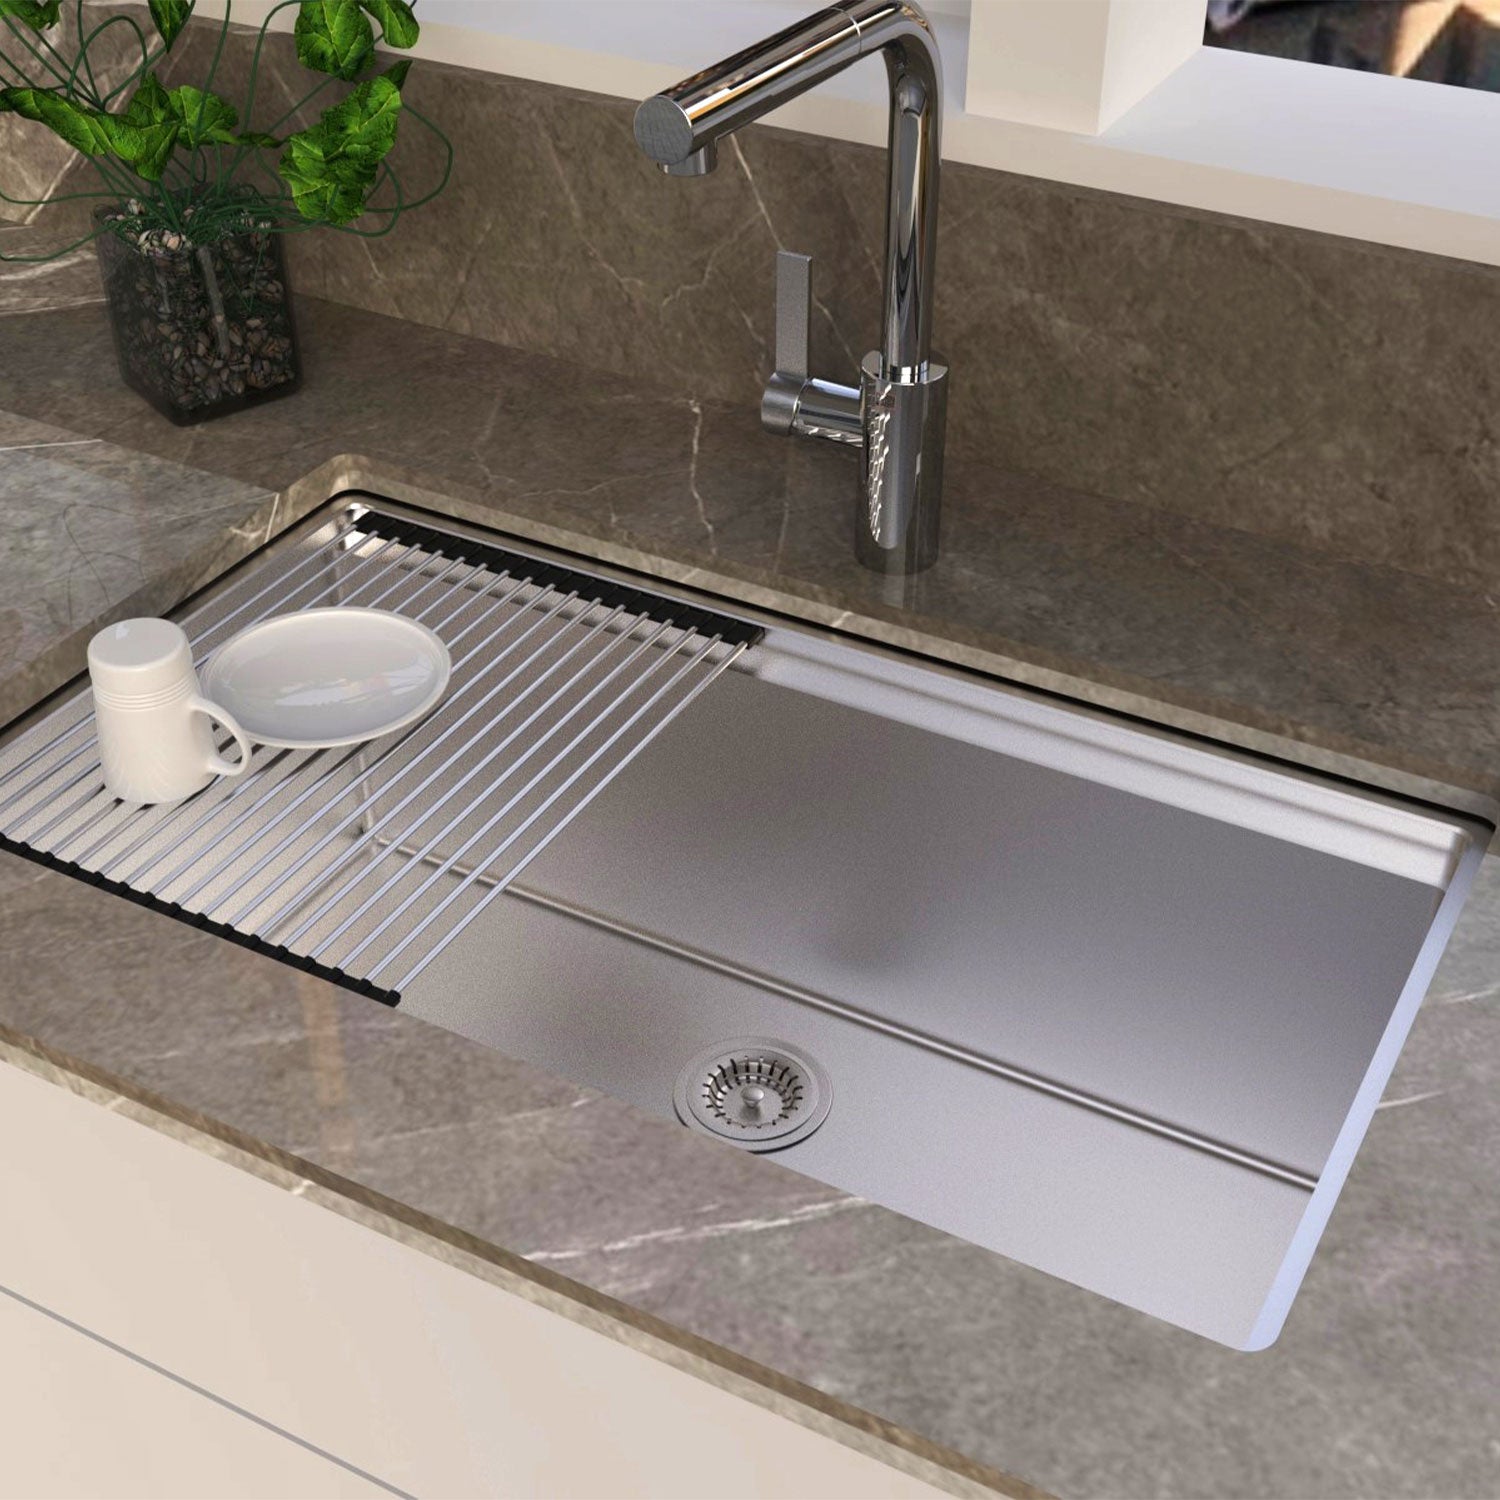 DAX Workstation Single Bowl Double Level Sink 32 x 18 - R10 - 18G. Accessories Included (DX-WS23219-R10)